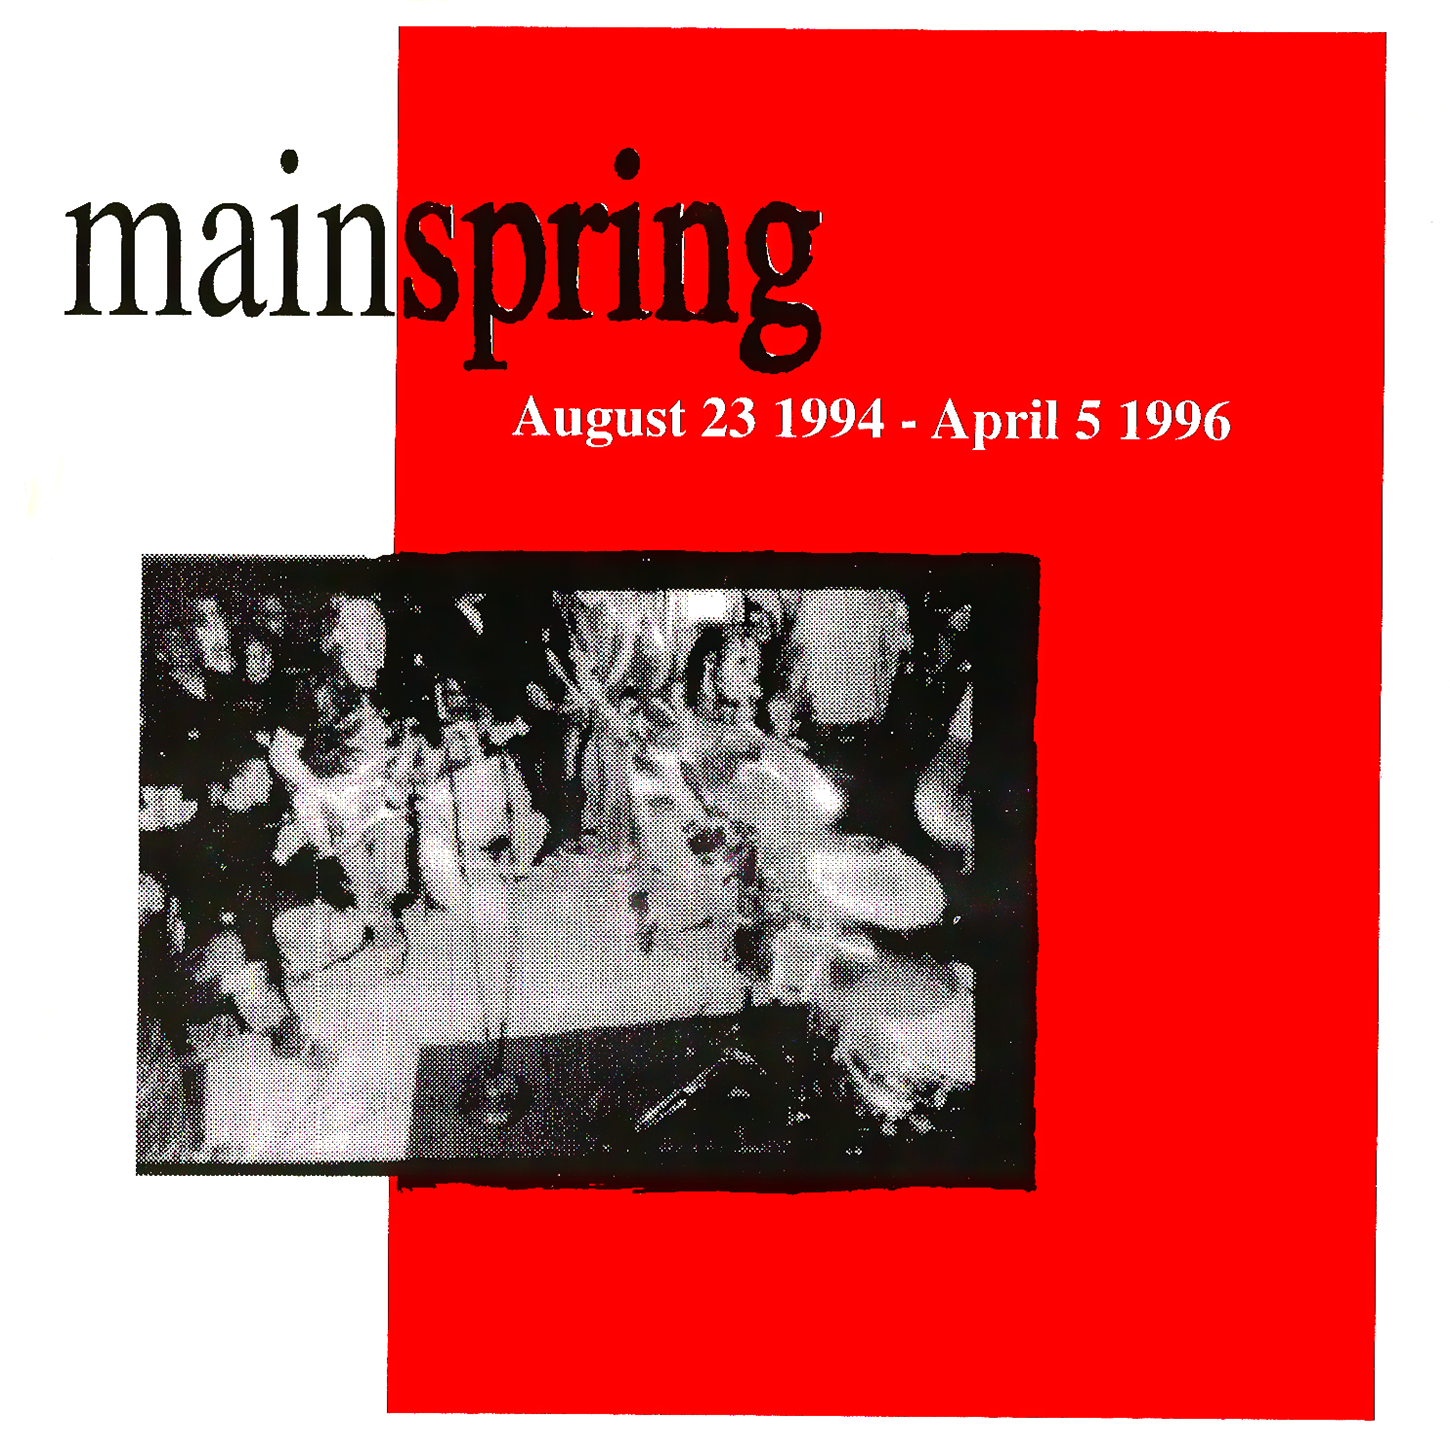 C.A.S.S. Records 007º - Mainspring "August 23 1994 - April 5 1996" Discography, CD, 1998